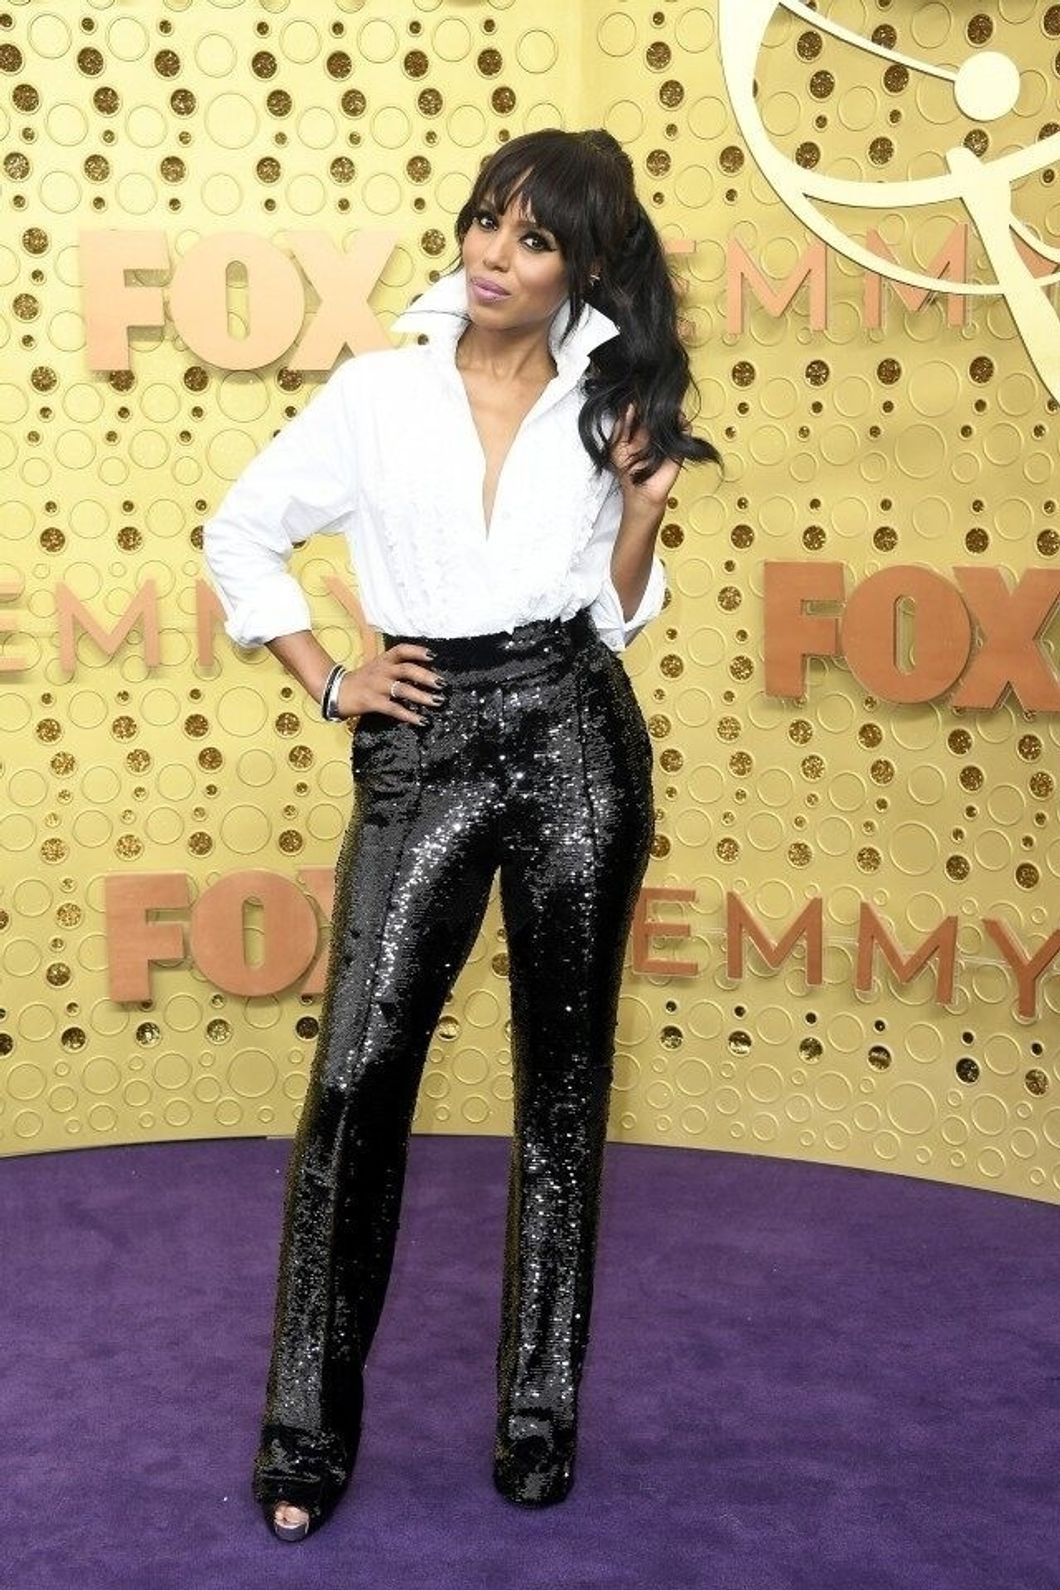 A Thank You To Kerry Washington’s Emmy’s Look